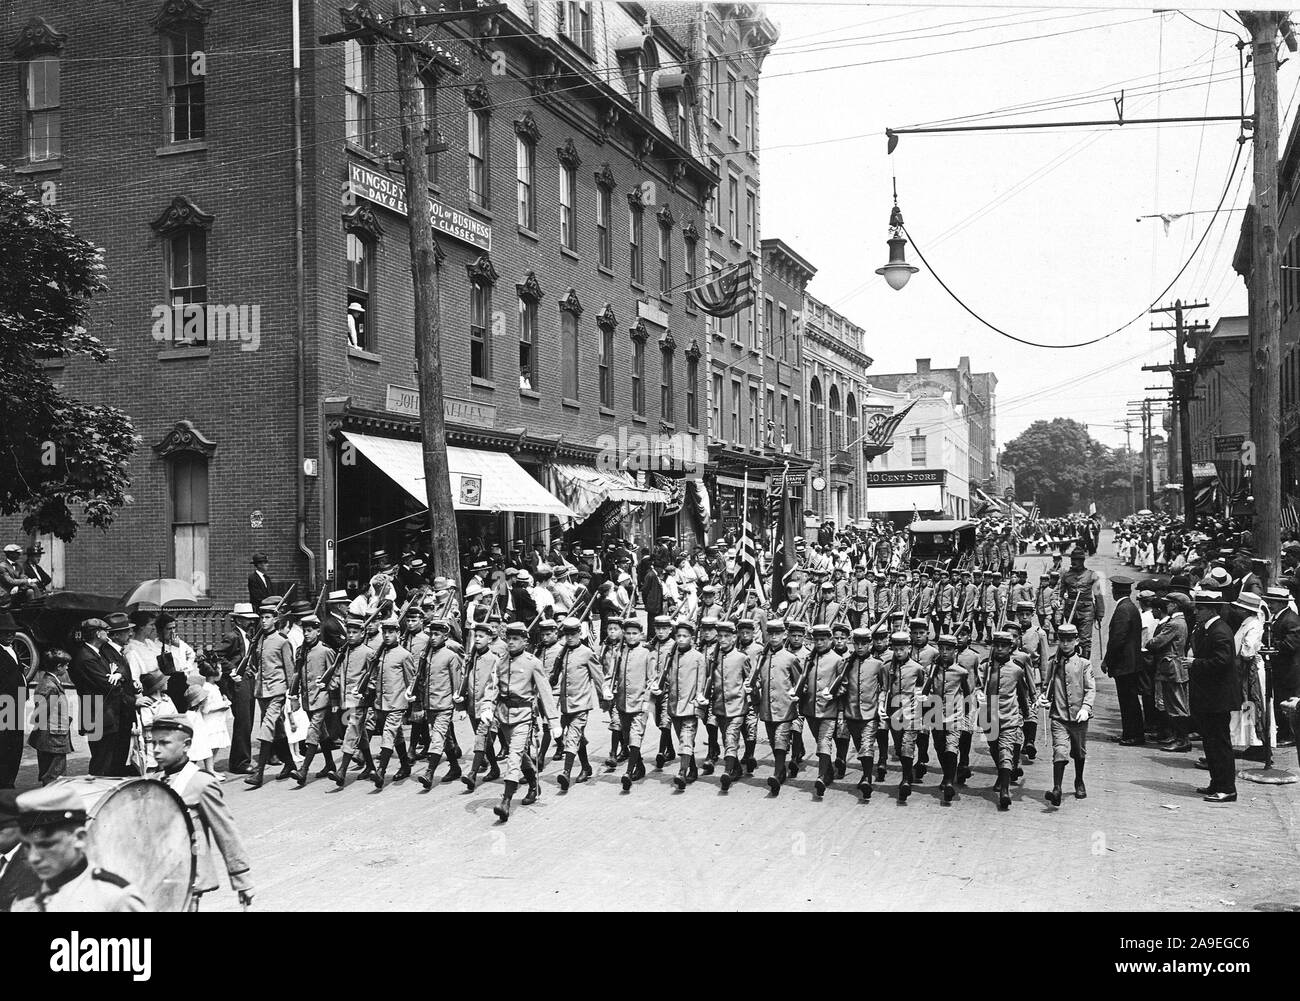 Ceremonies - Independence Day, 1917 - Boys from St. Agnes Convent